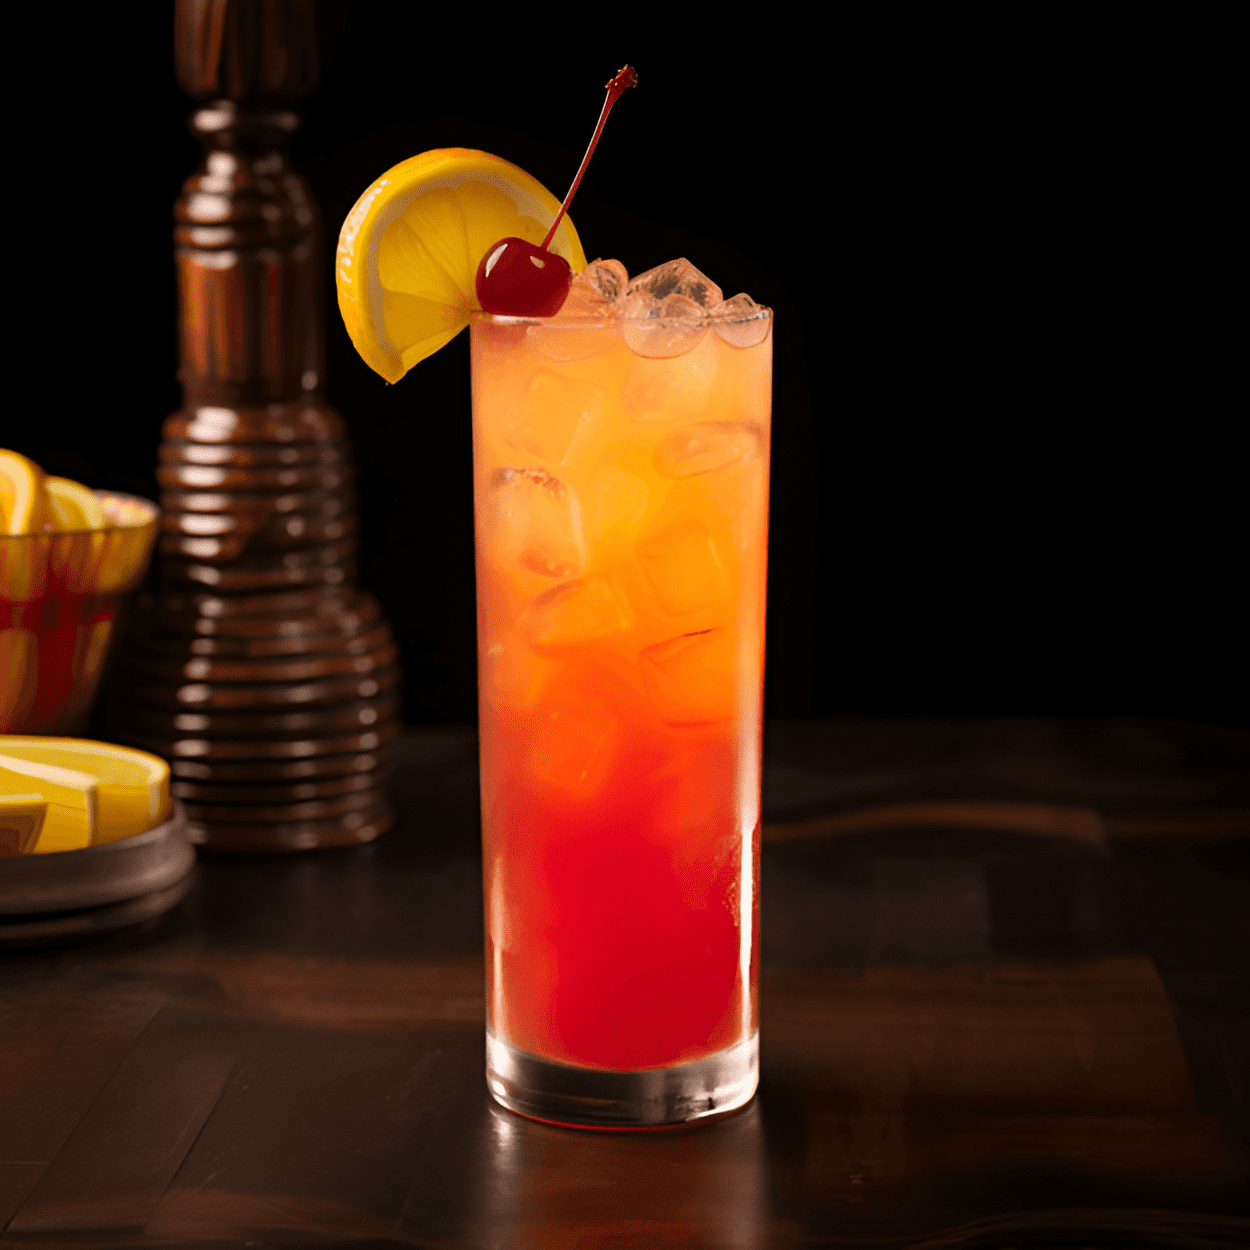 Jarrito Loco Cocktail Recipe - The Jarrito Loco is a sweet, fruity cocktail with a refreshing, tropical taste. It has a delightful blend of citrus and berry flavors, with a hint of tequila that adds a nice kick. It's light, crisp, and incredibly refreshing.